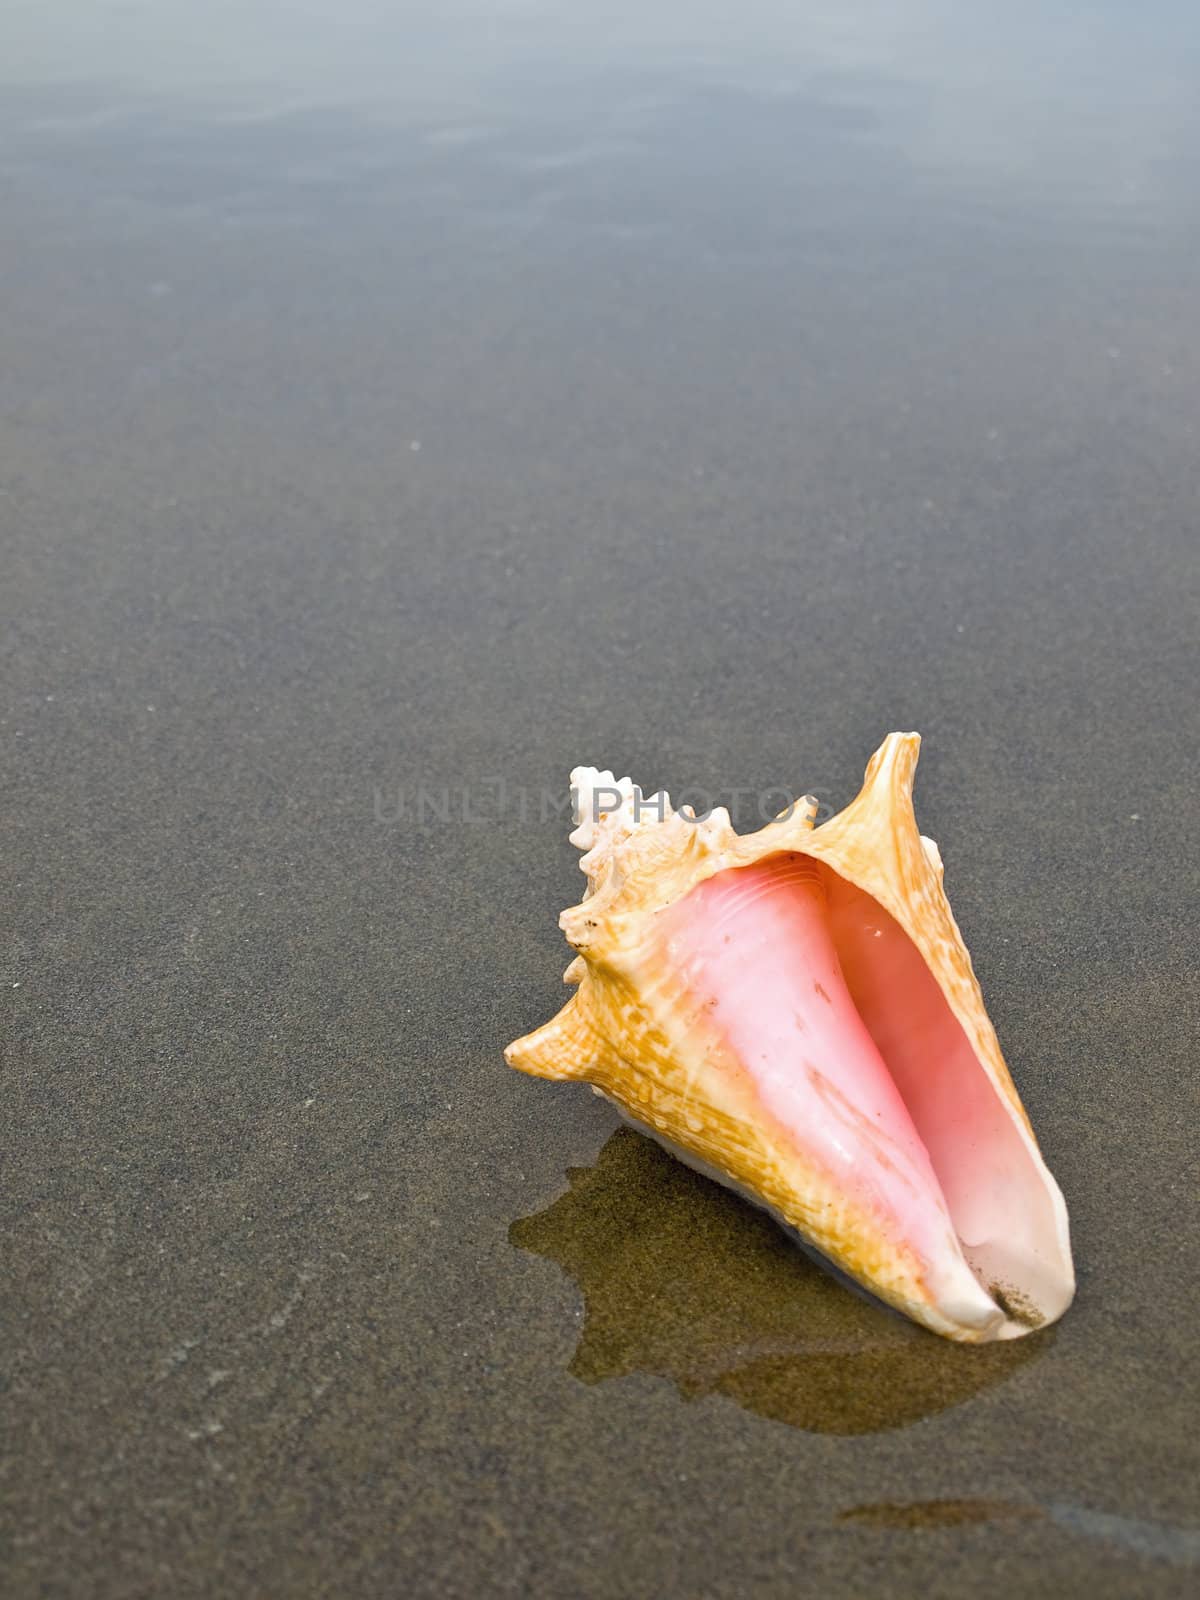 Scallop and Conch Shells on a Cool Wet Sandy Beach